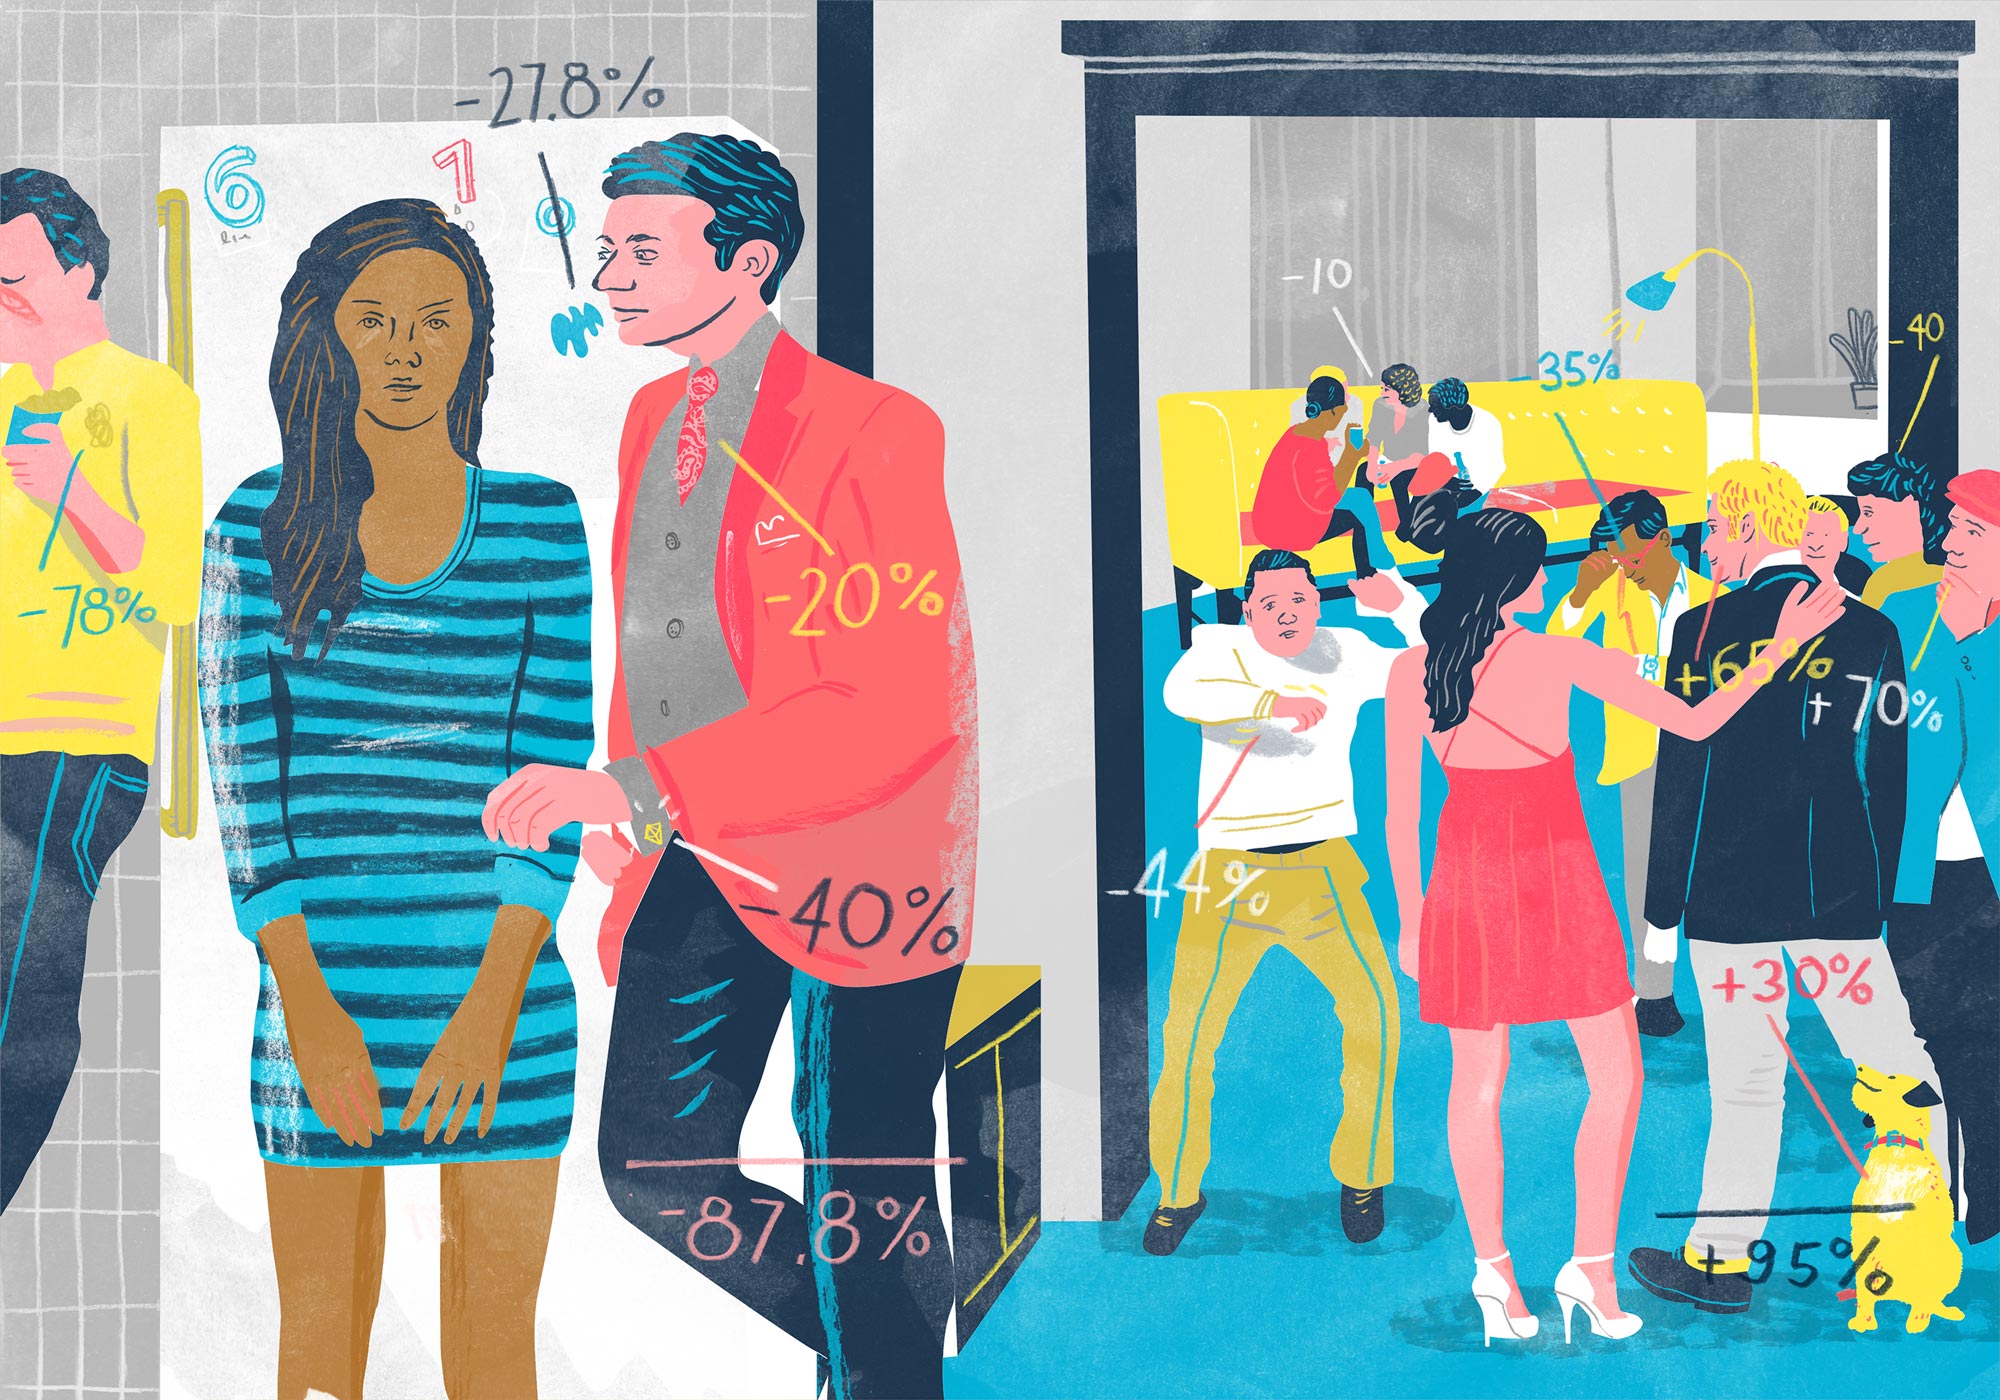 What’s the probability of finding your soulmate at a party? Read The
Mathematics of Love